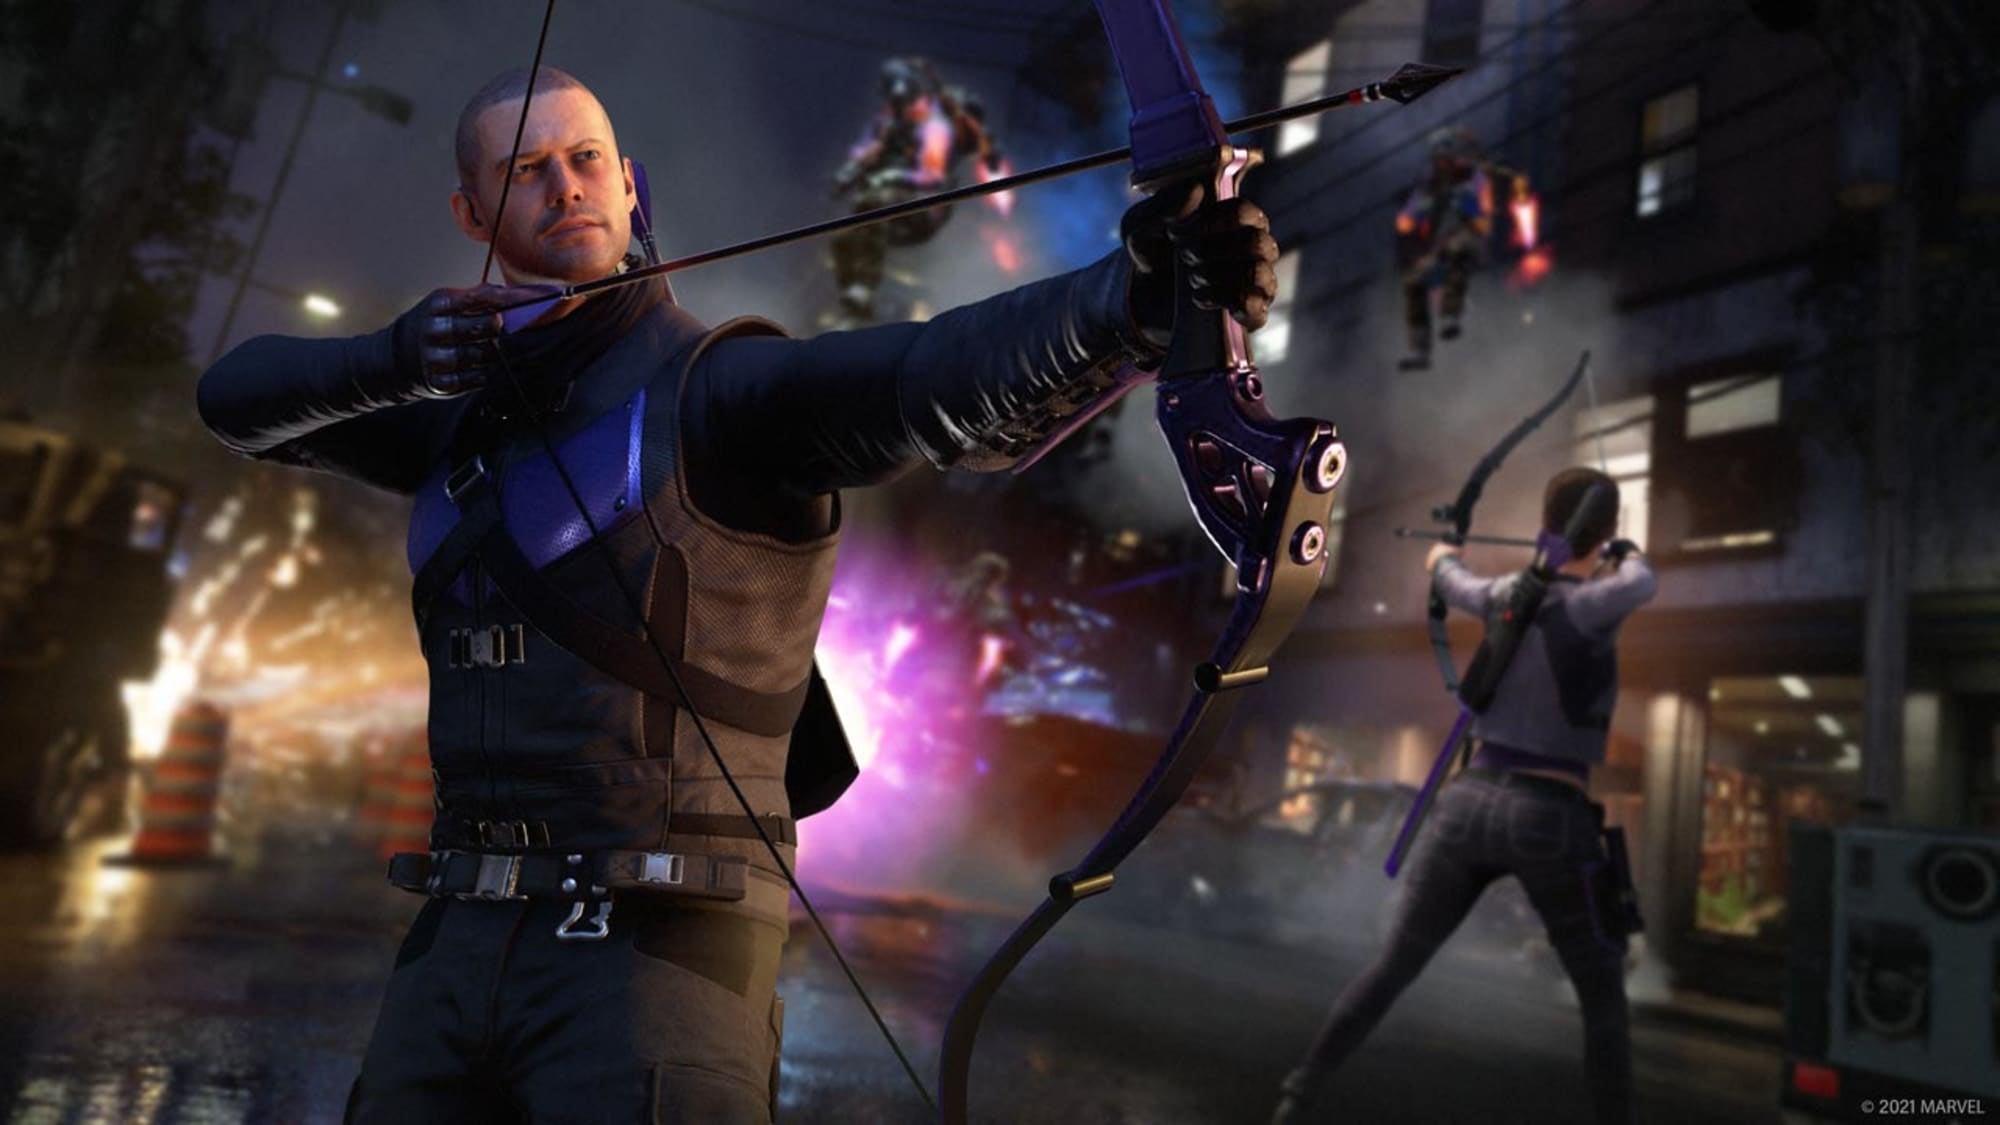 Marvel’s Avengers will slow down levels with Hawkeye DLC on March 18